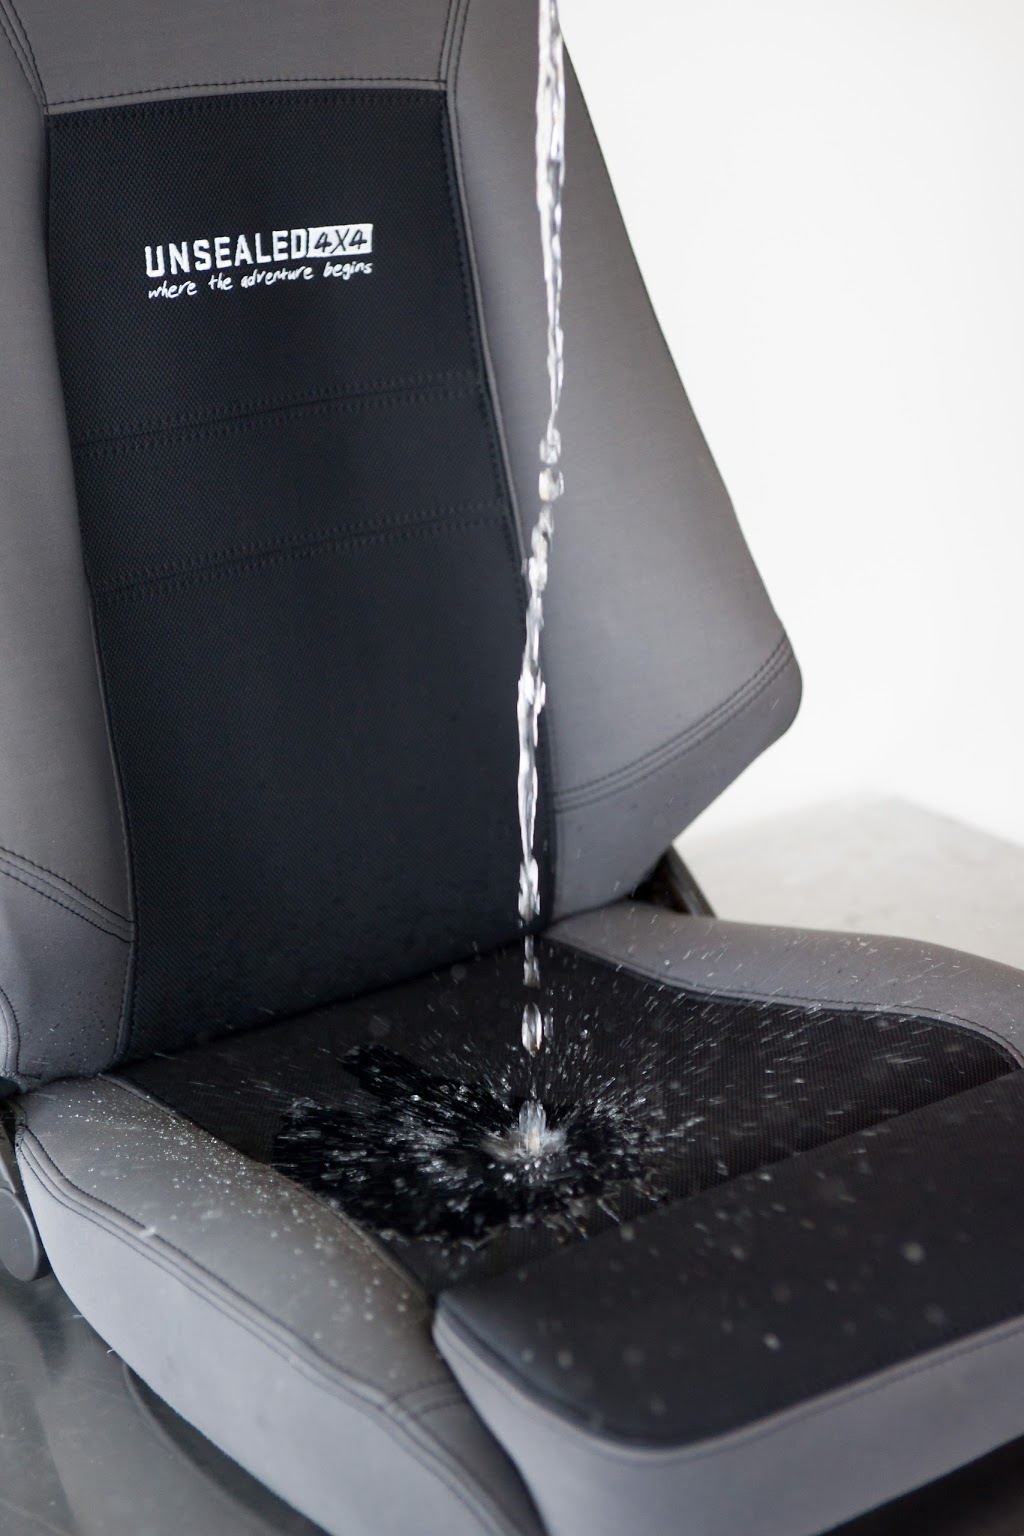 The WetSeat | car repair | 2/10C Childs Rd, Chipping Norton NSW 2170, Australia | 0297249499 OR +61 2 9724 9499